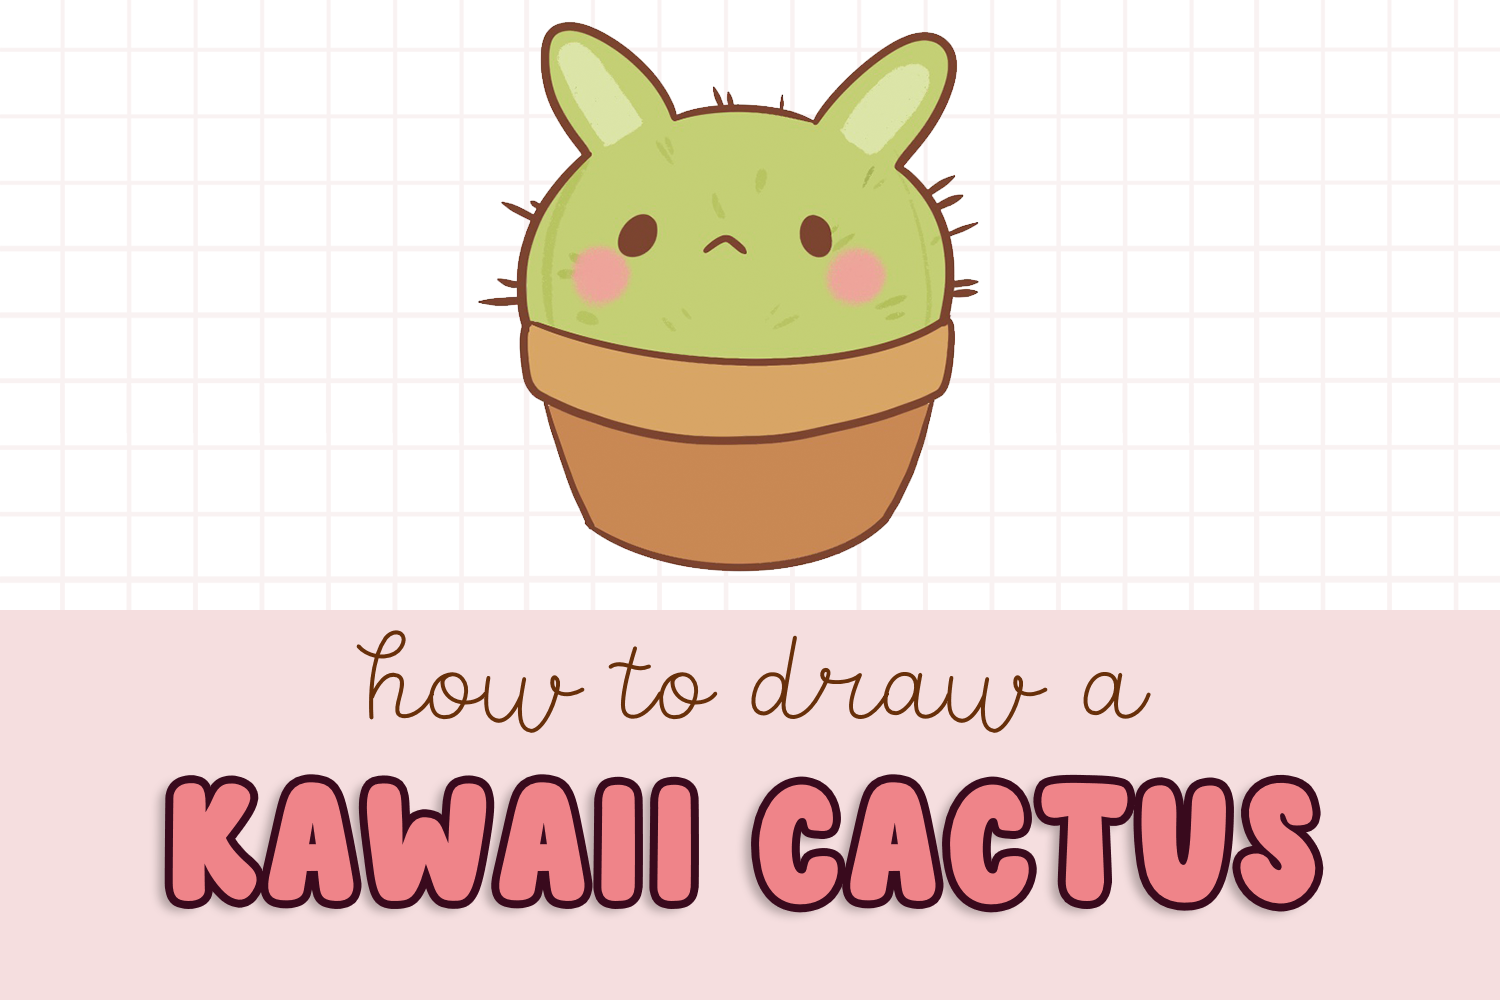 How to Draw a Cute Picture - Easy Drawing Tutorial For Kids